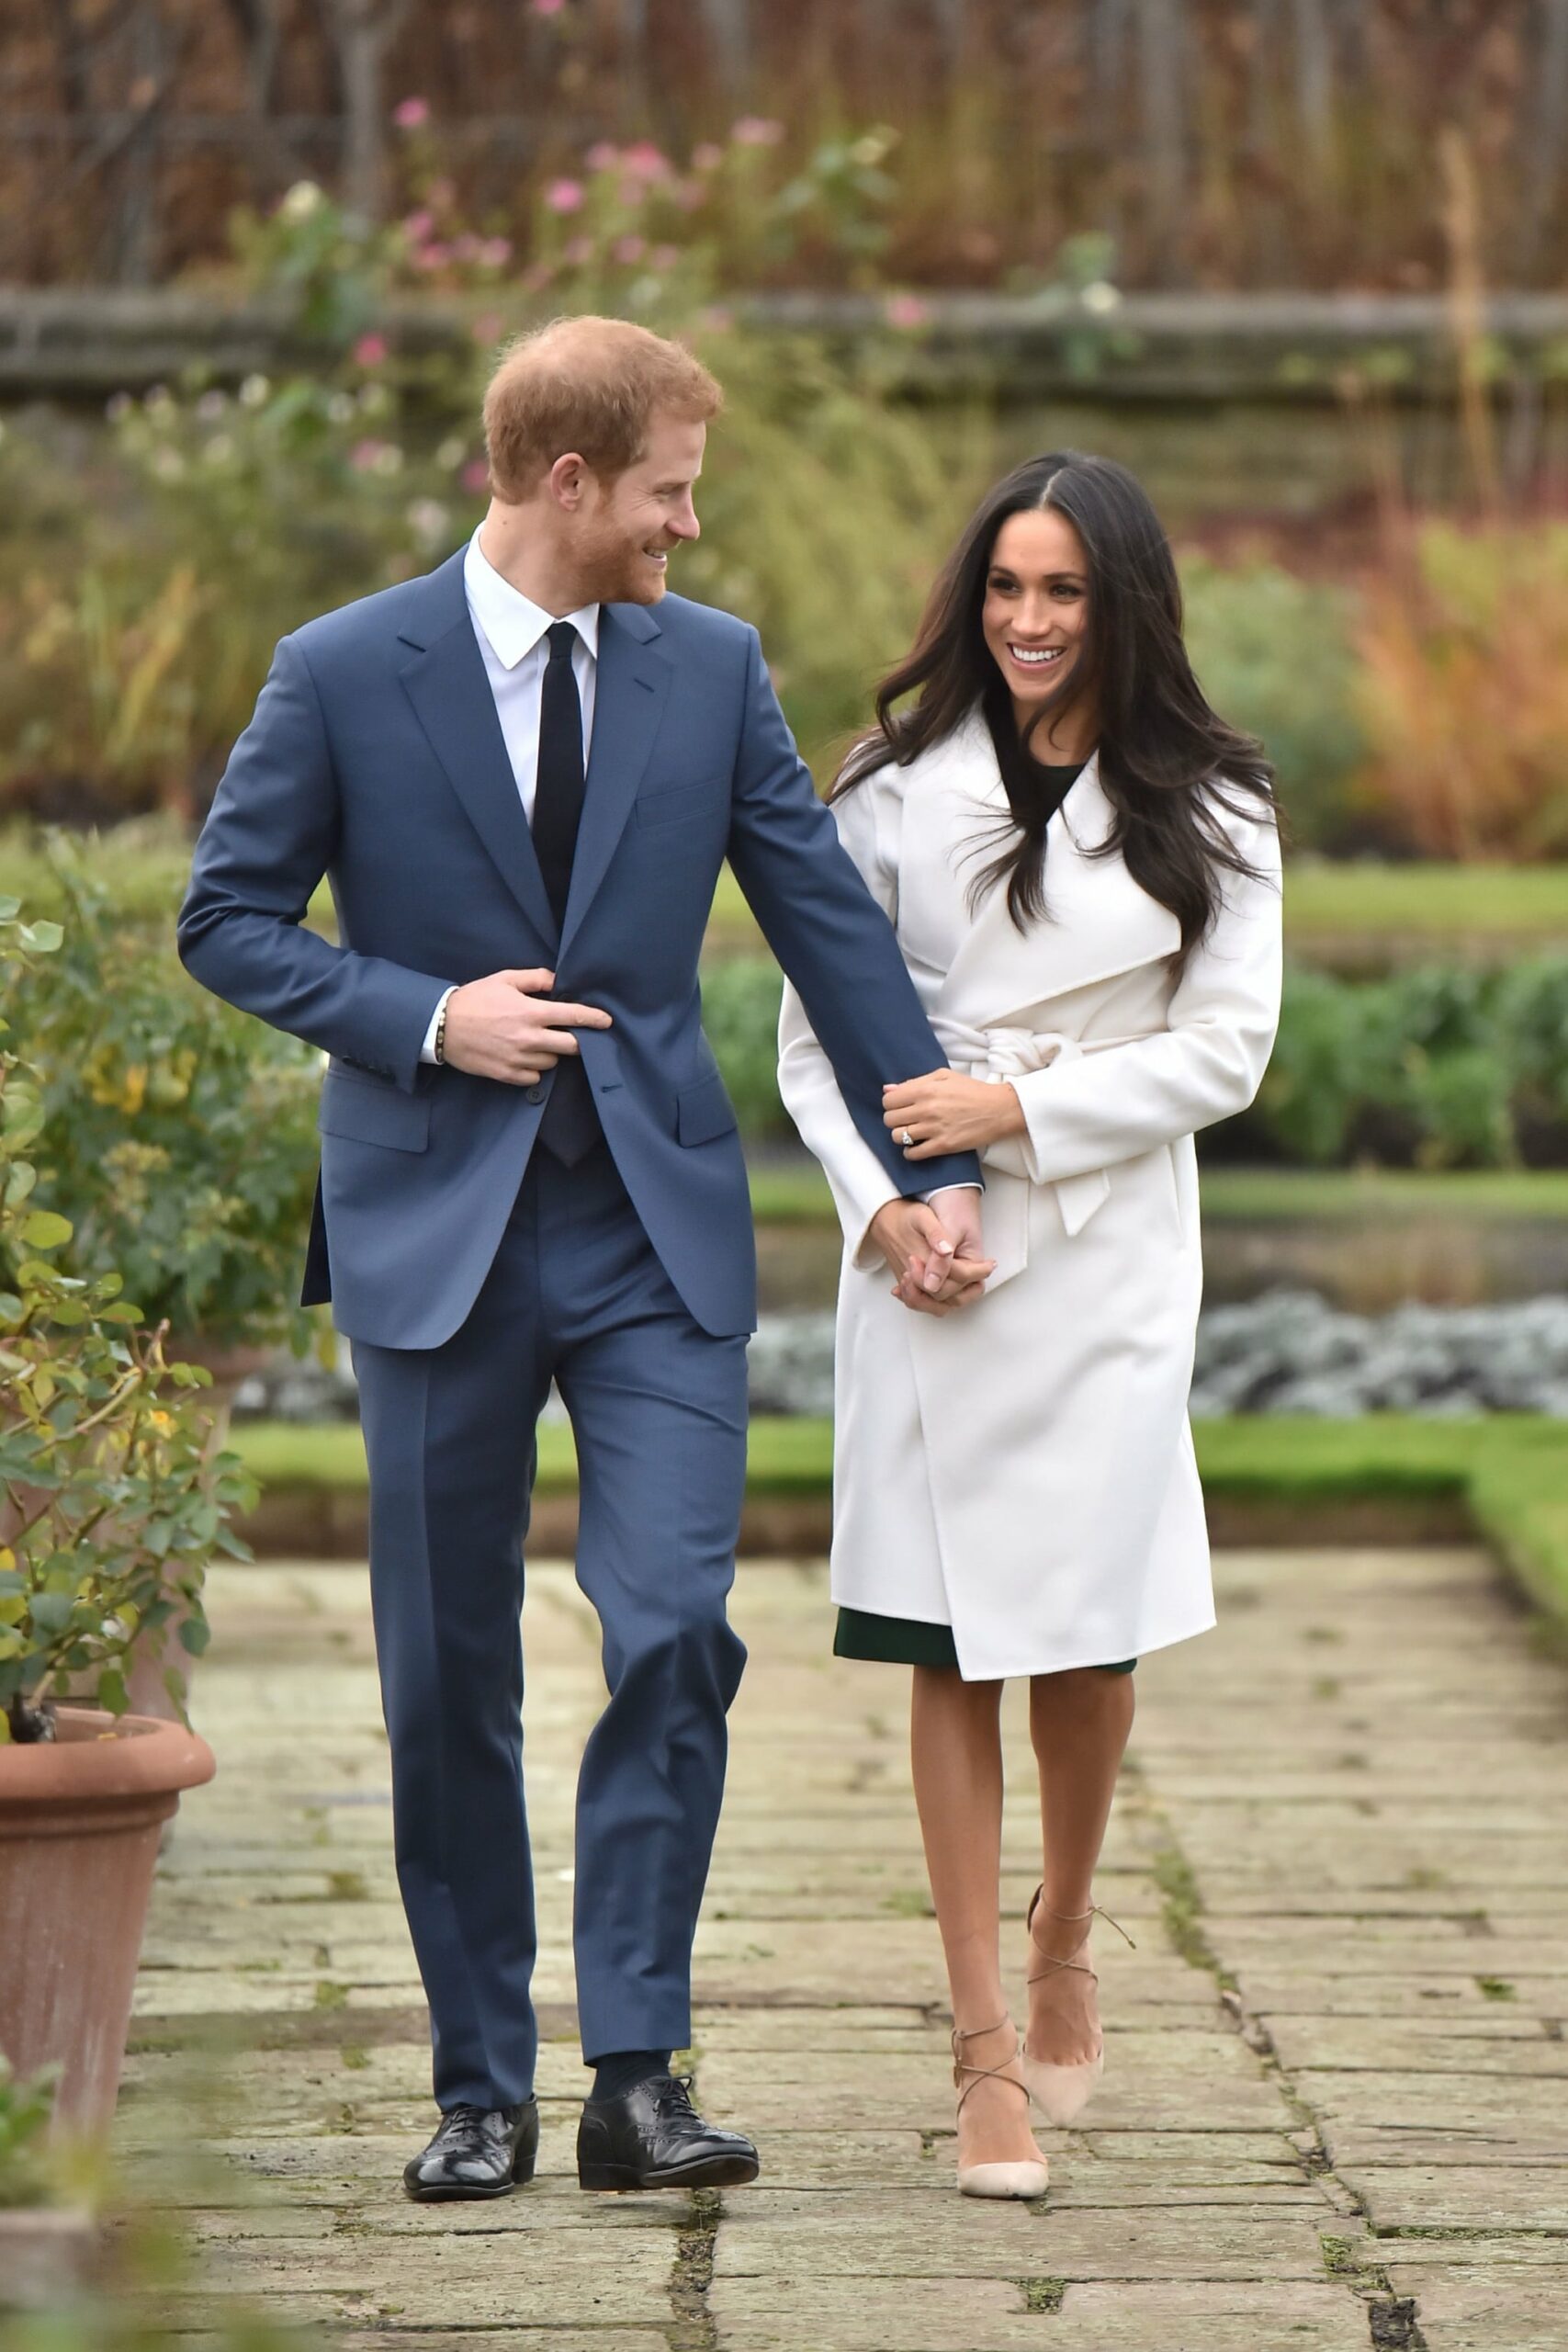 Prince Harry and Meghan Markle in the Sunken Garden at Kensington Palace, London, after the announcement of their engagement.